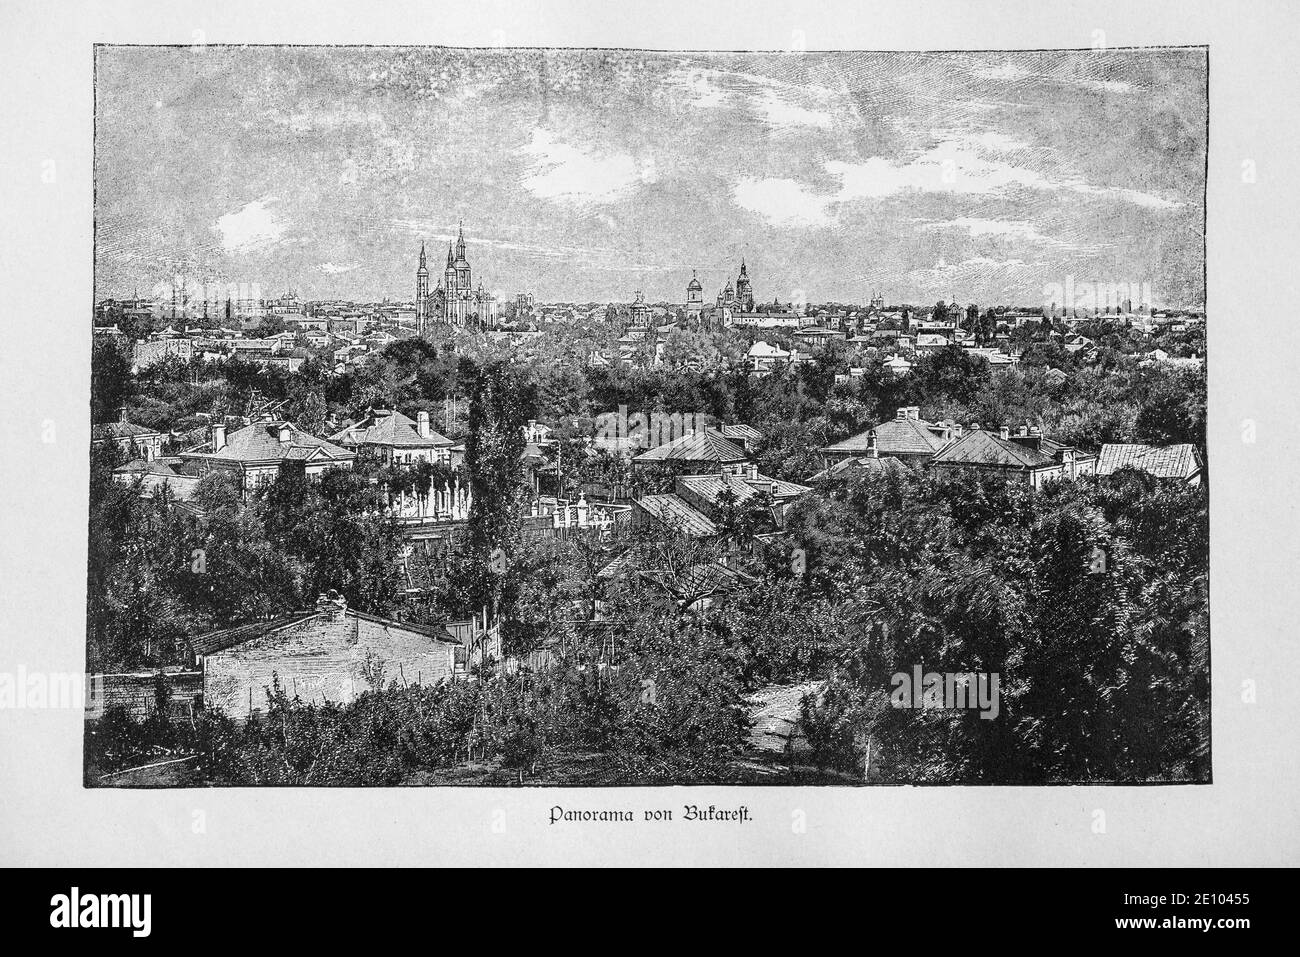 'Panorama von Bukarest', panoramic view of Bucharest from the outskirts to the city,Bucharest, Romania, illustration from 'Die Hauptstädte der Welt', Stock Photo